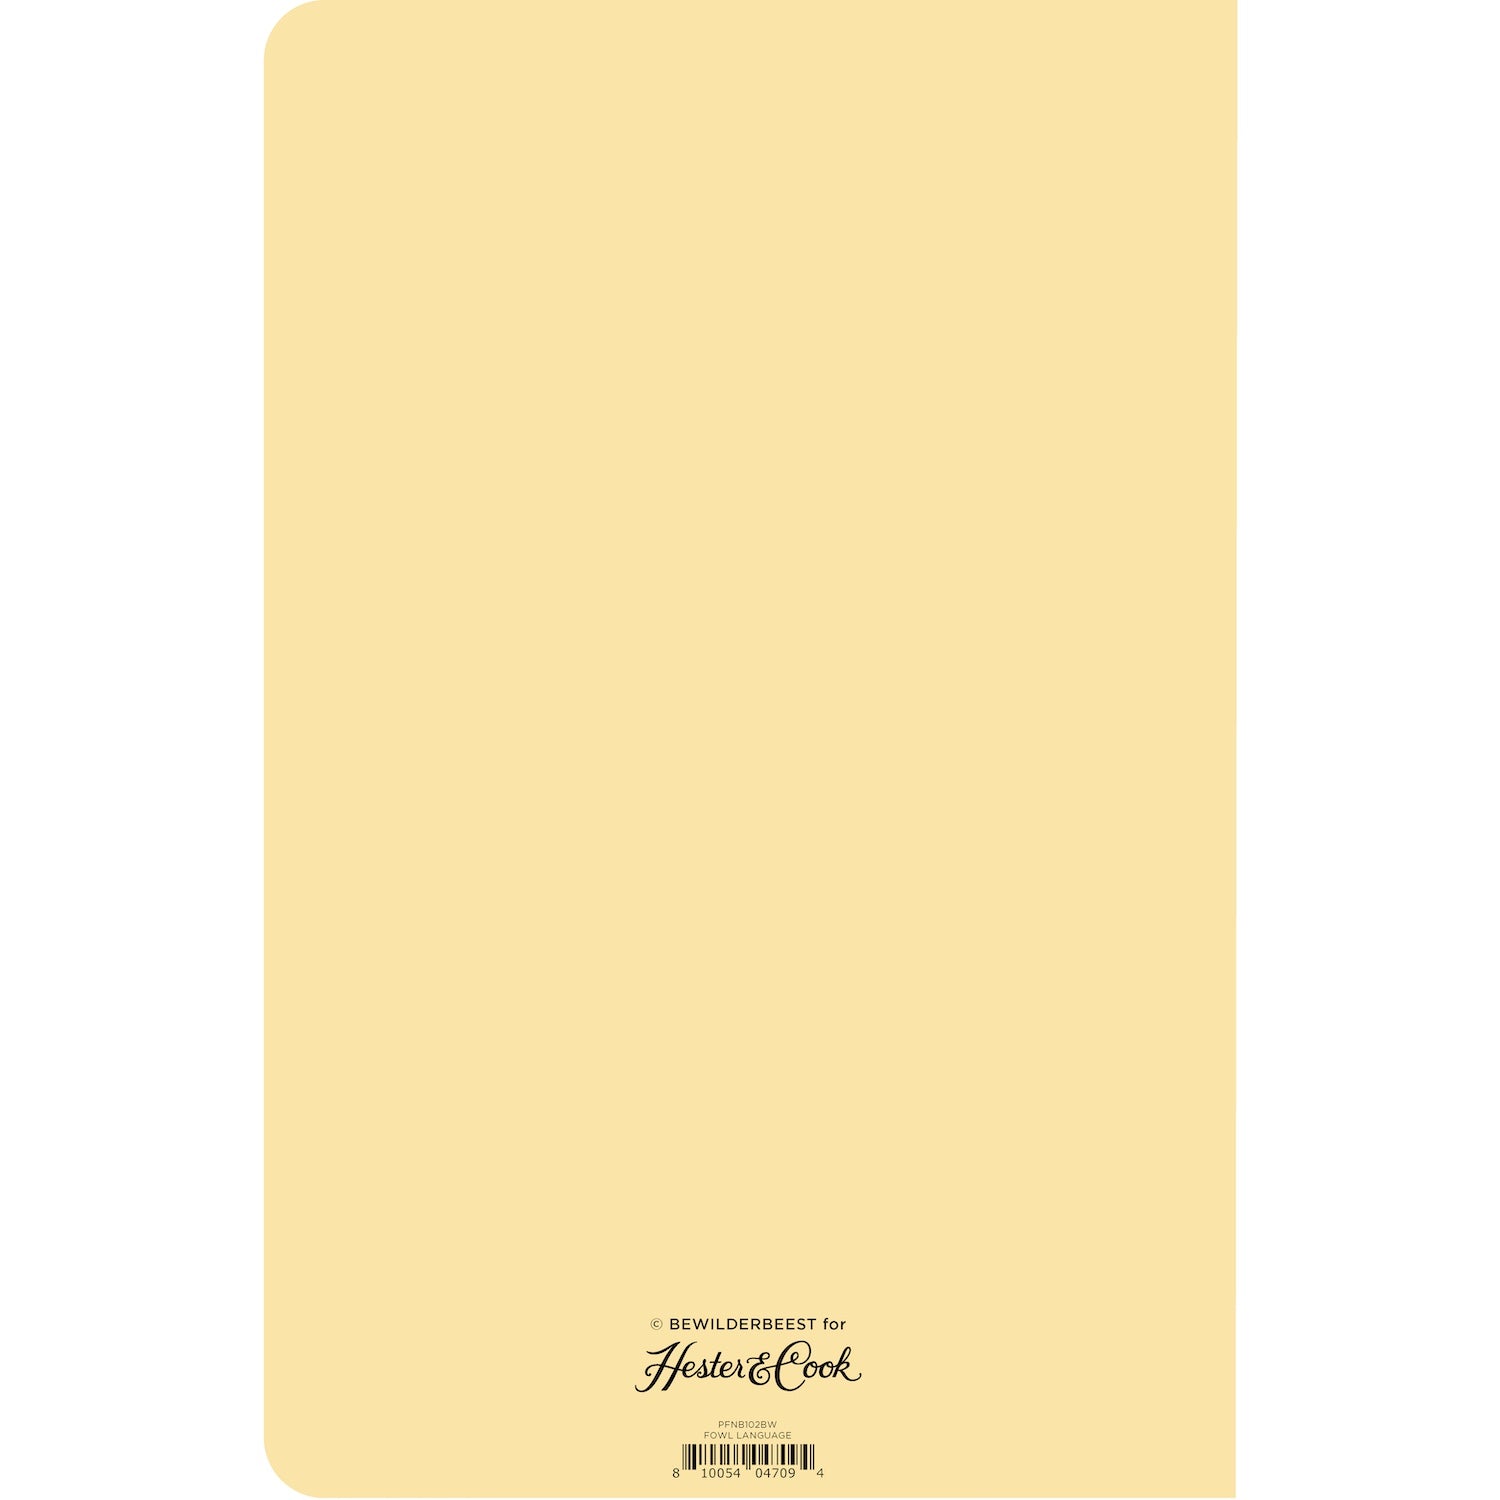 The back cover of the Fowl Language Notebook is solid light yellow with the Hester &amp; Cook logo at the bottom. 